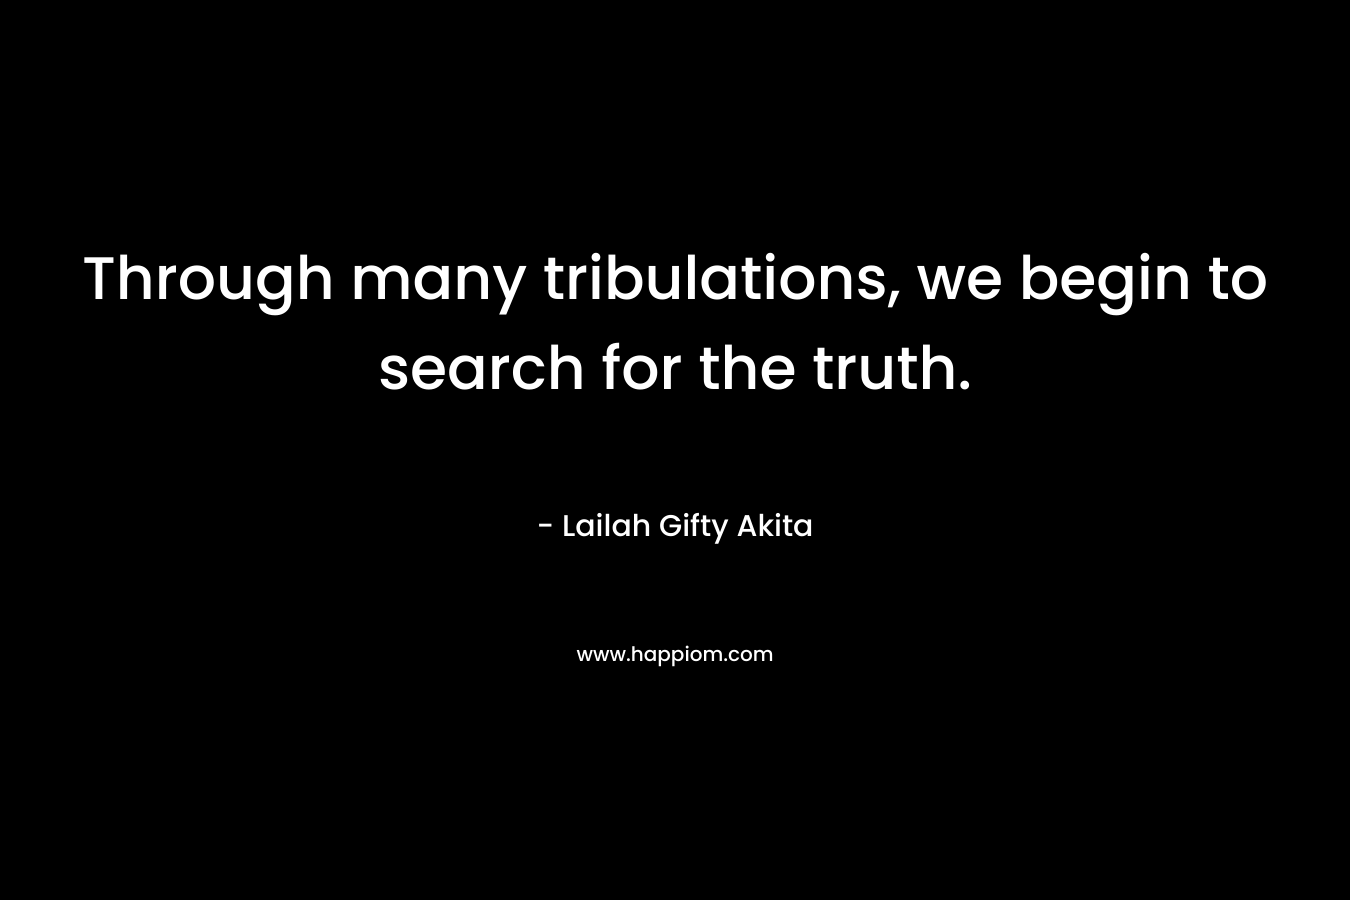 Through many tribulations, we begin to search for the truth.